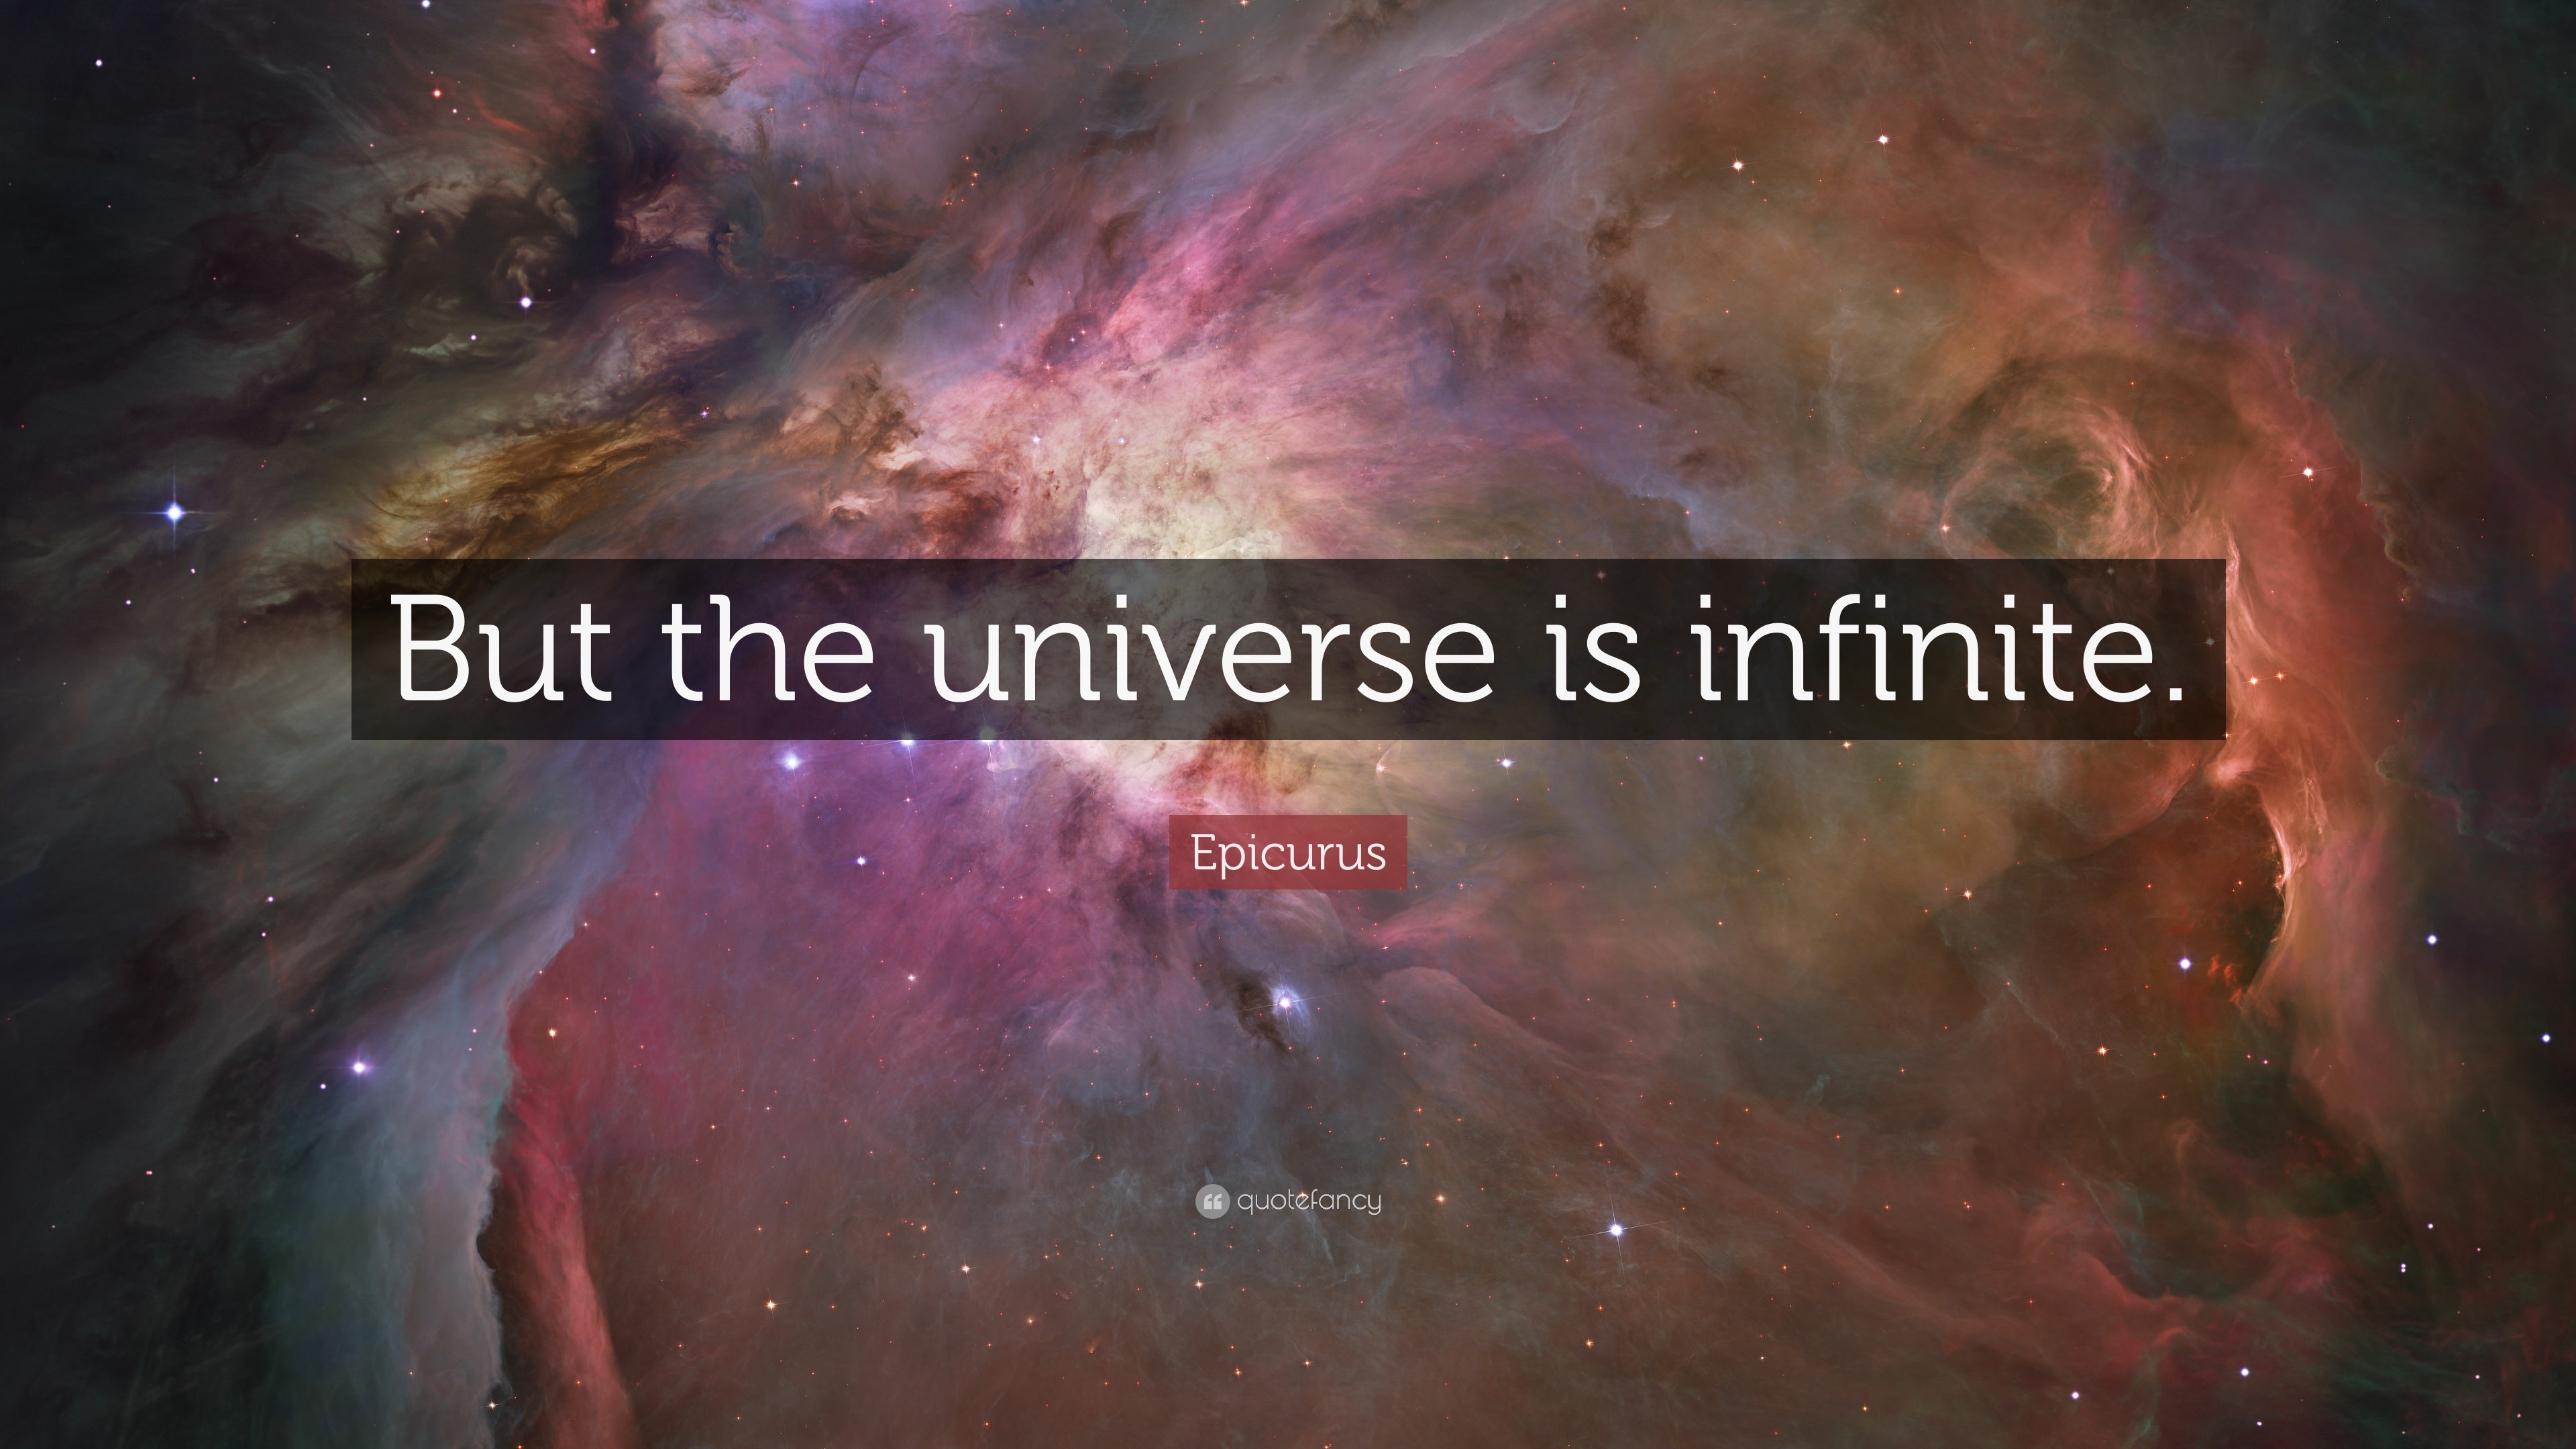 1165328 quote space nebula universe astronomy midnight Pillars of  Creation Carl Sagan darkness screenshot special effects outer space  astronomical object  Rare Gallery HD Wallpapers